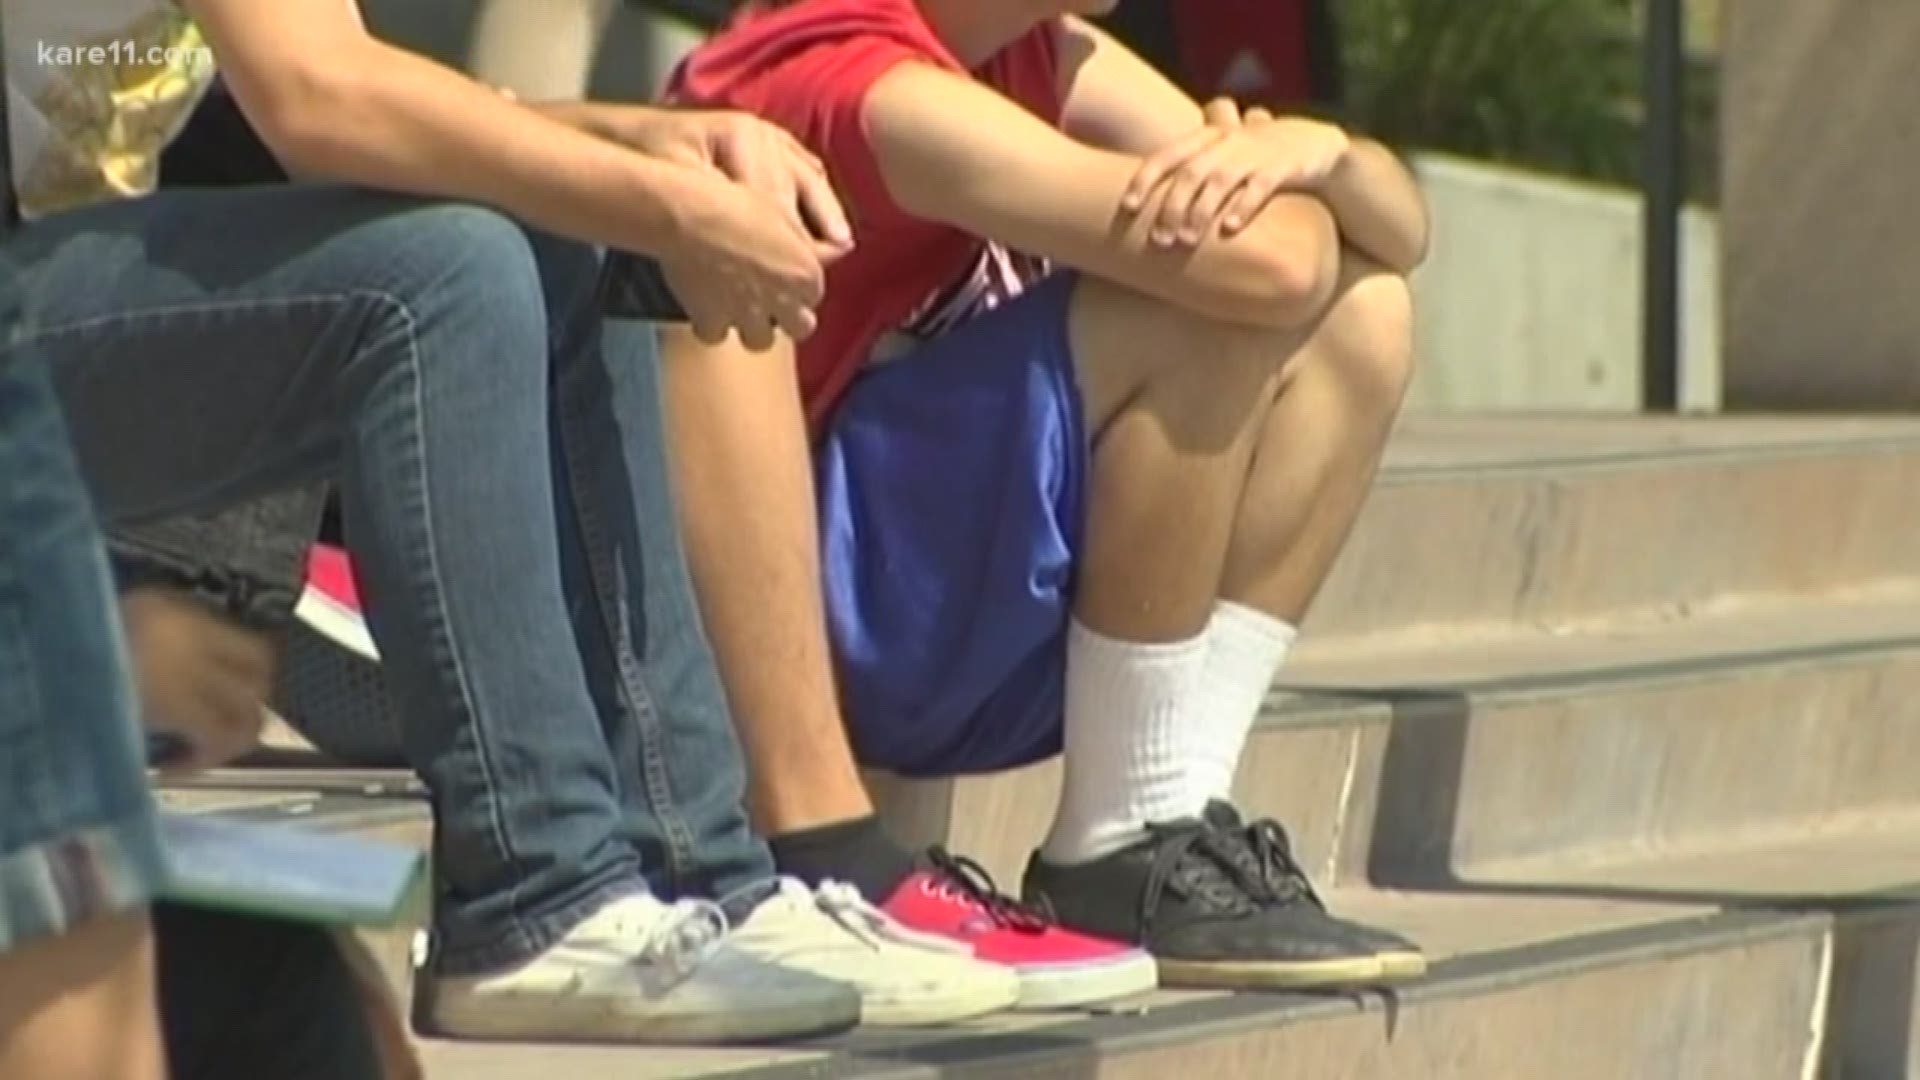 Suicide is the second leading cause of death among teenagers. https://kare11.tv/2VZITke